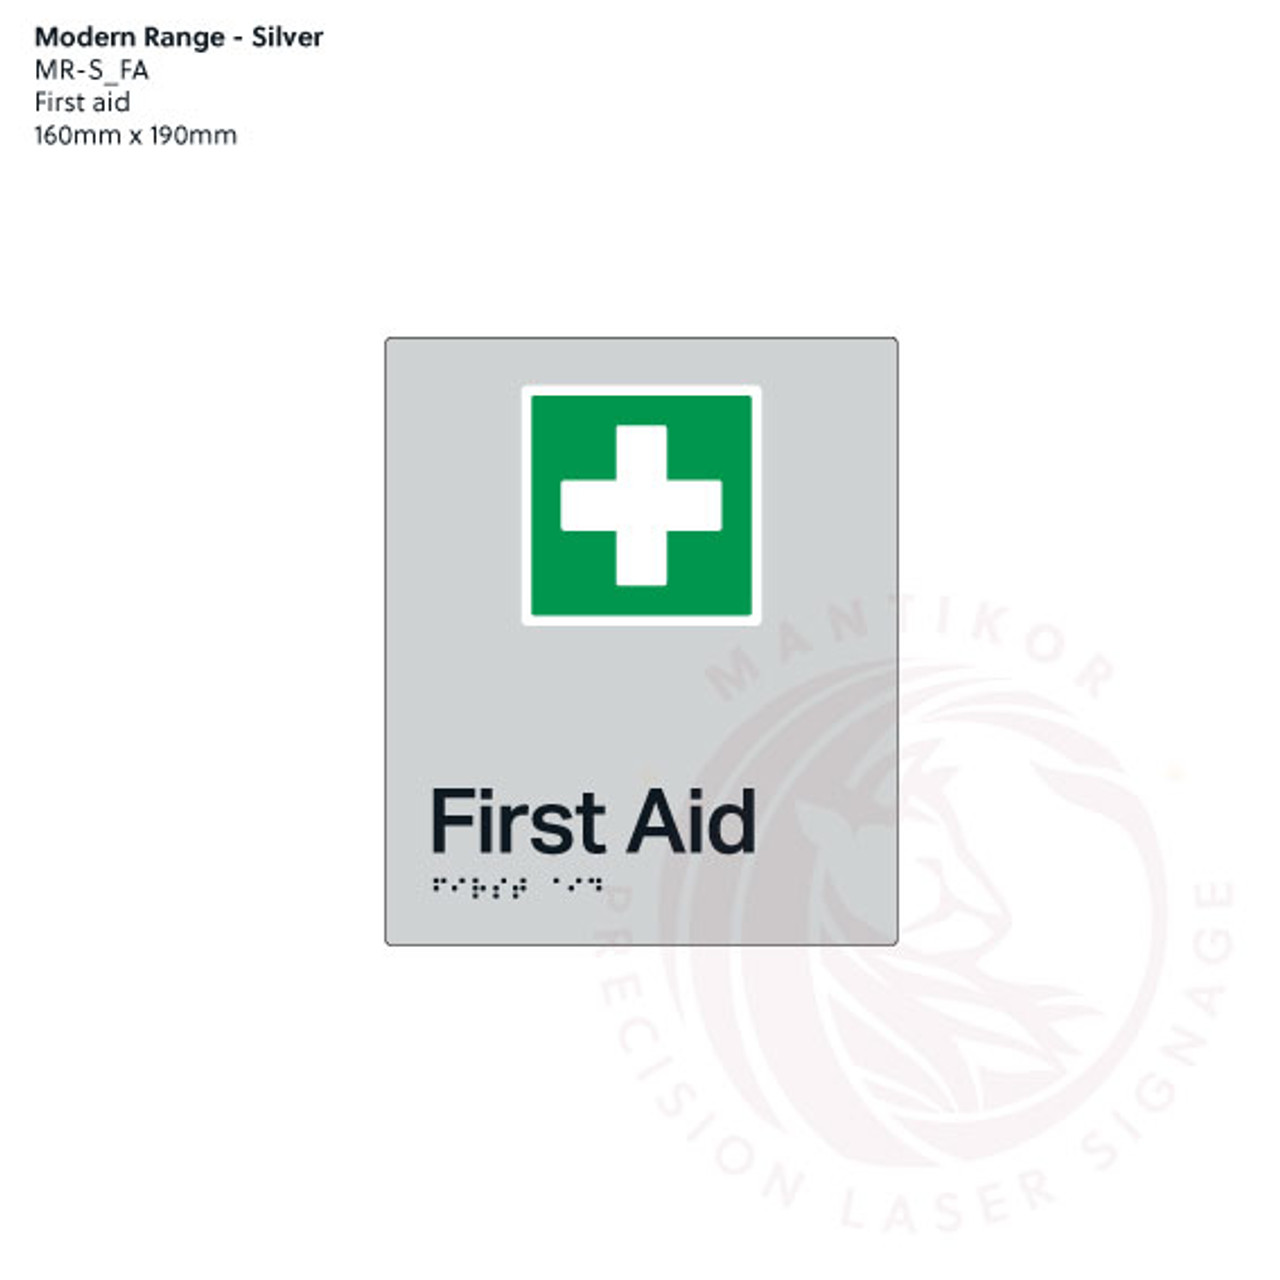 Modern Range - Silver Acrylic Braille Signs - First Aid